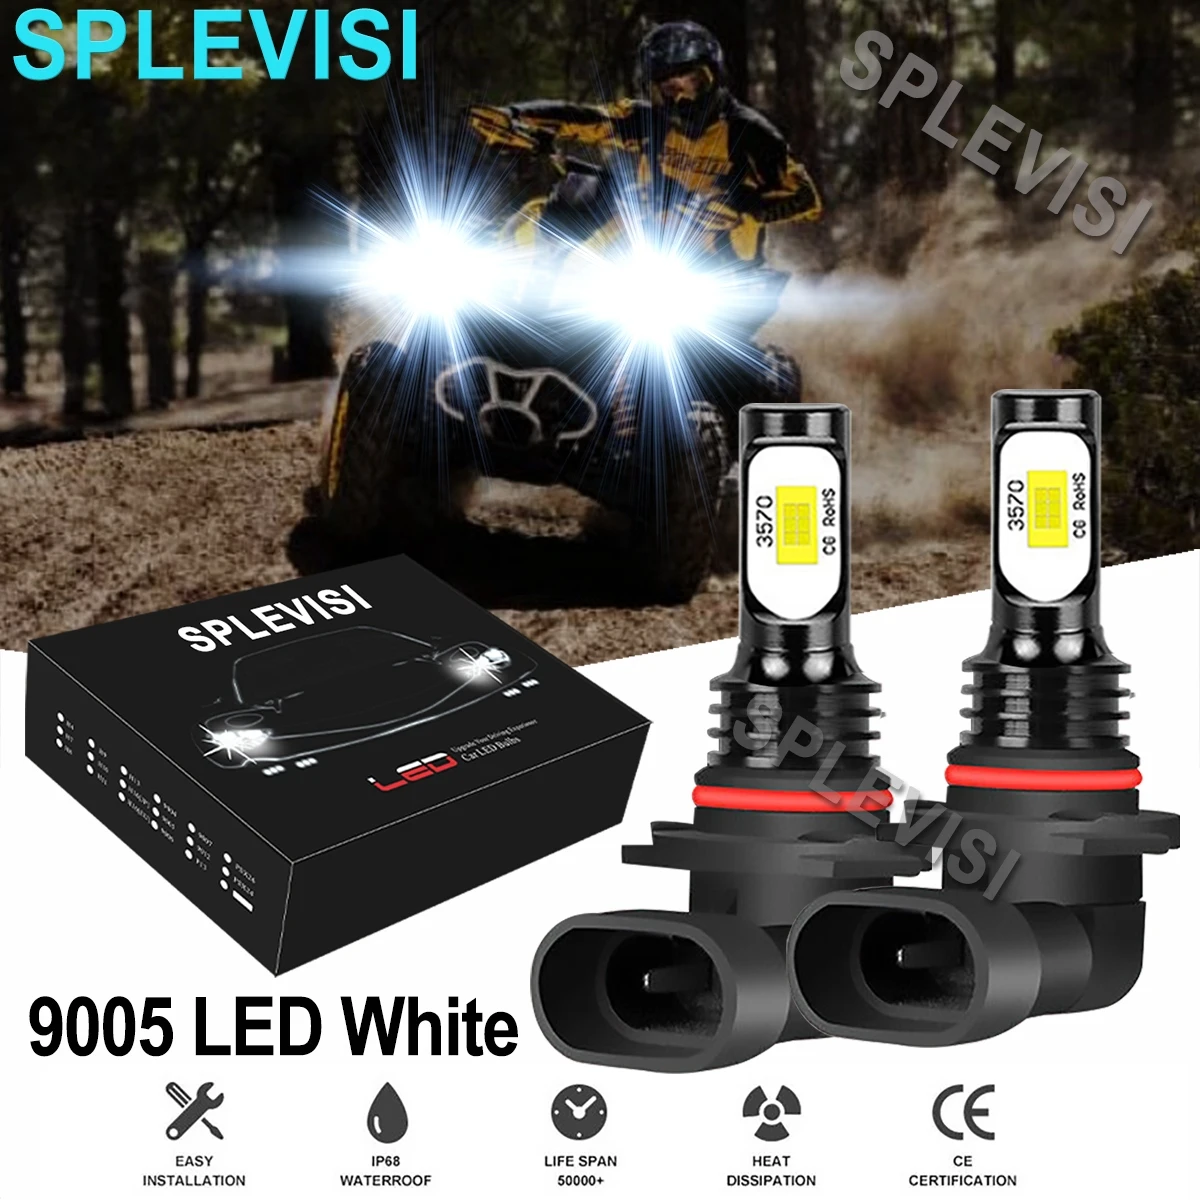 2x 70W 6000k pure white LED Headlight Bulbs Kit For Can-Am Renegade 1000 800 800R 650 500